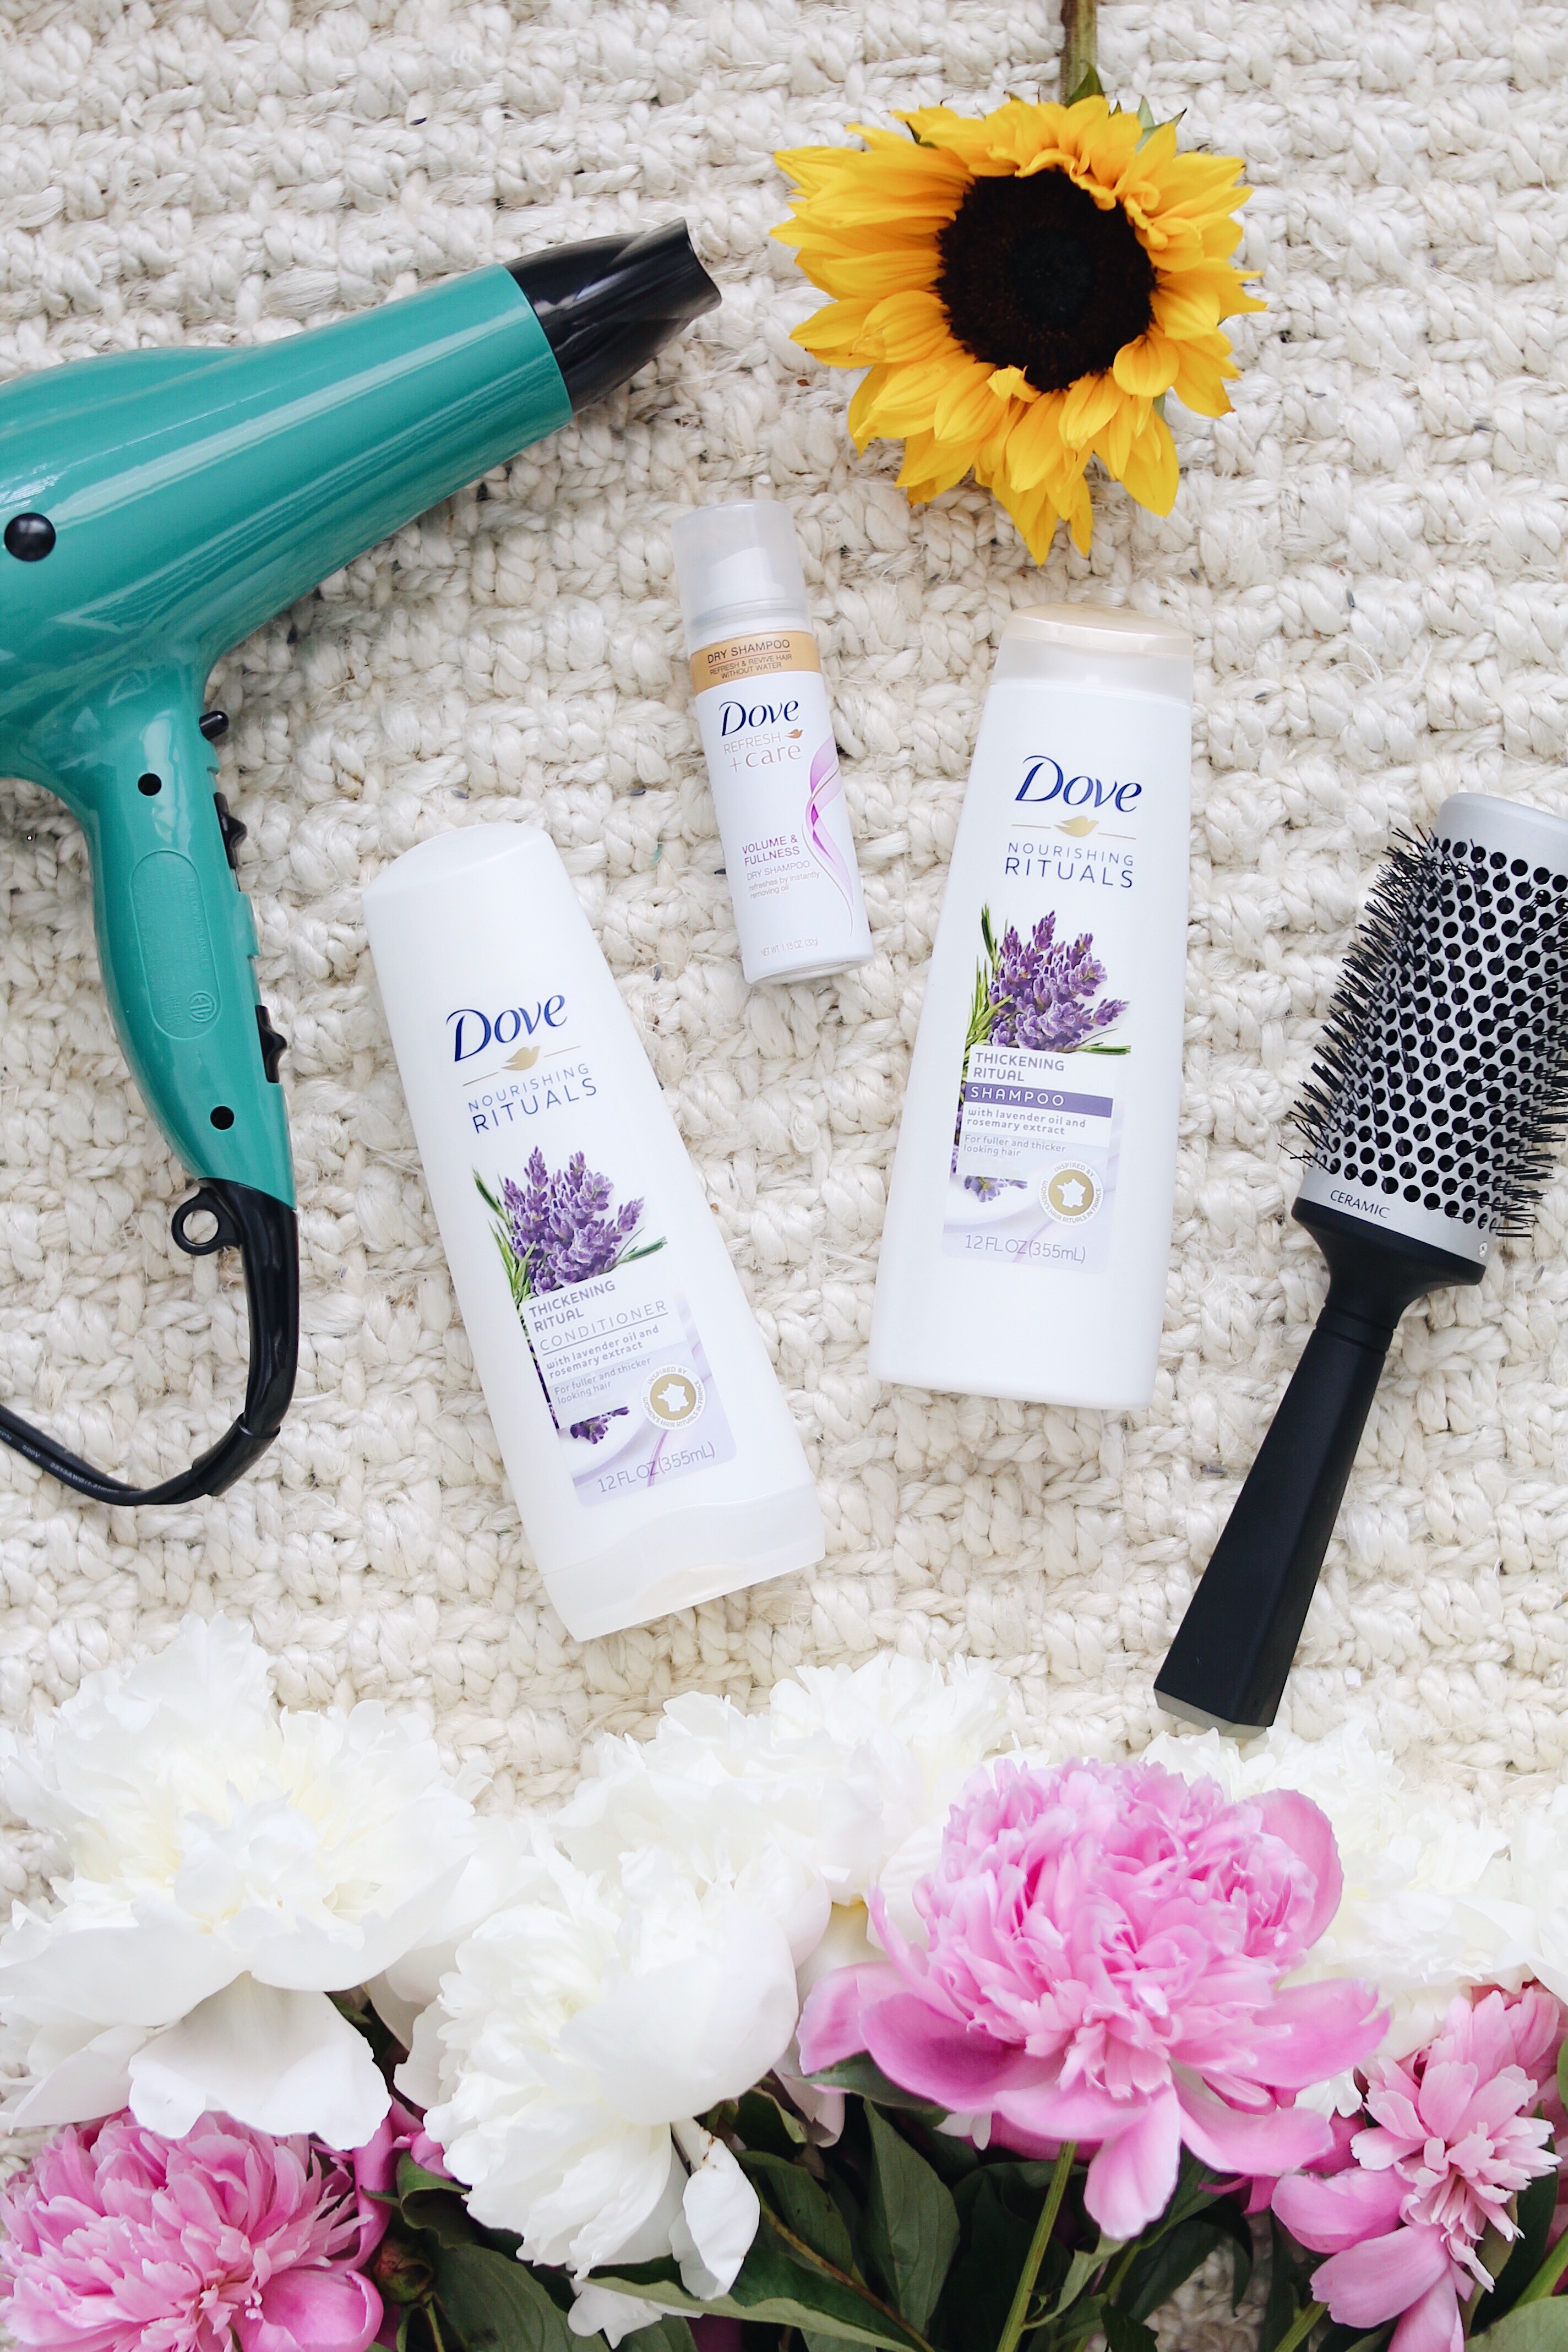 How to add volume with dry shampoo and a blow dryer. So easy and your hair will look fabulous! #ad #dovehaircare #hairtutorial #hairtips #dryshampoo #hairvolume